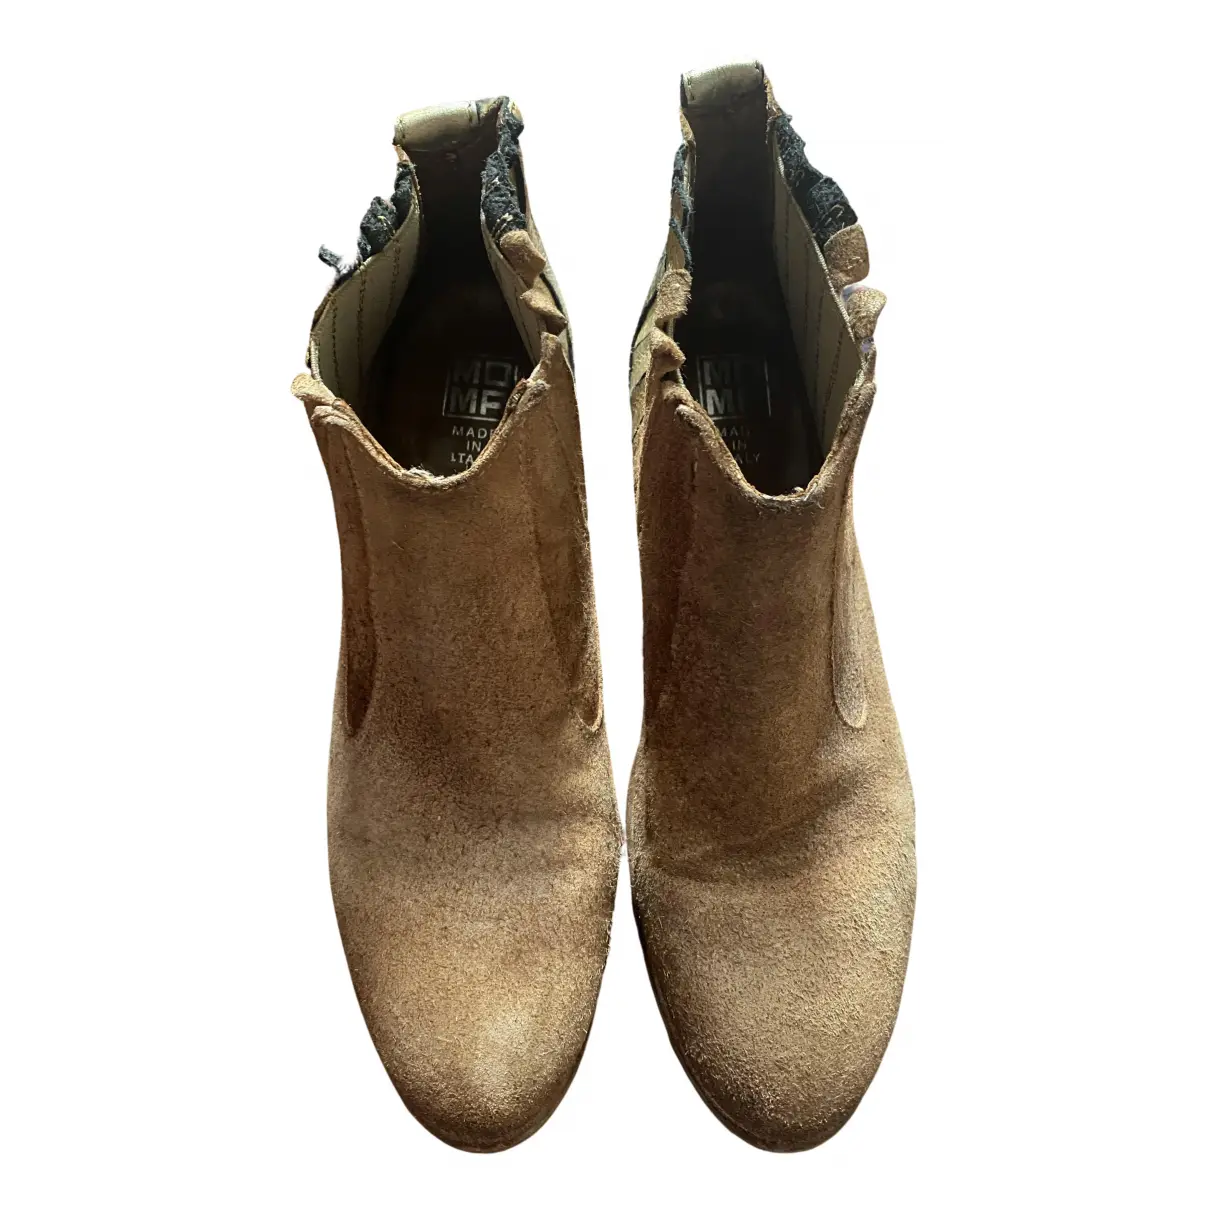 Buy Moma Western boots online